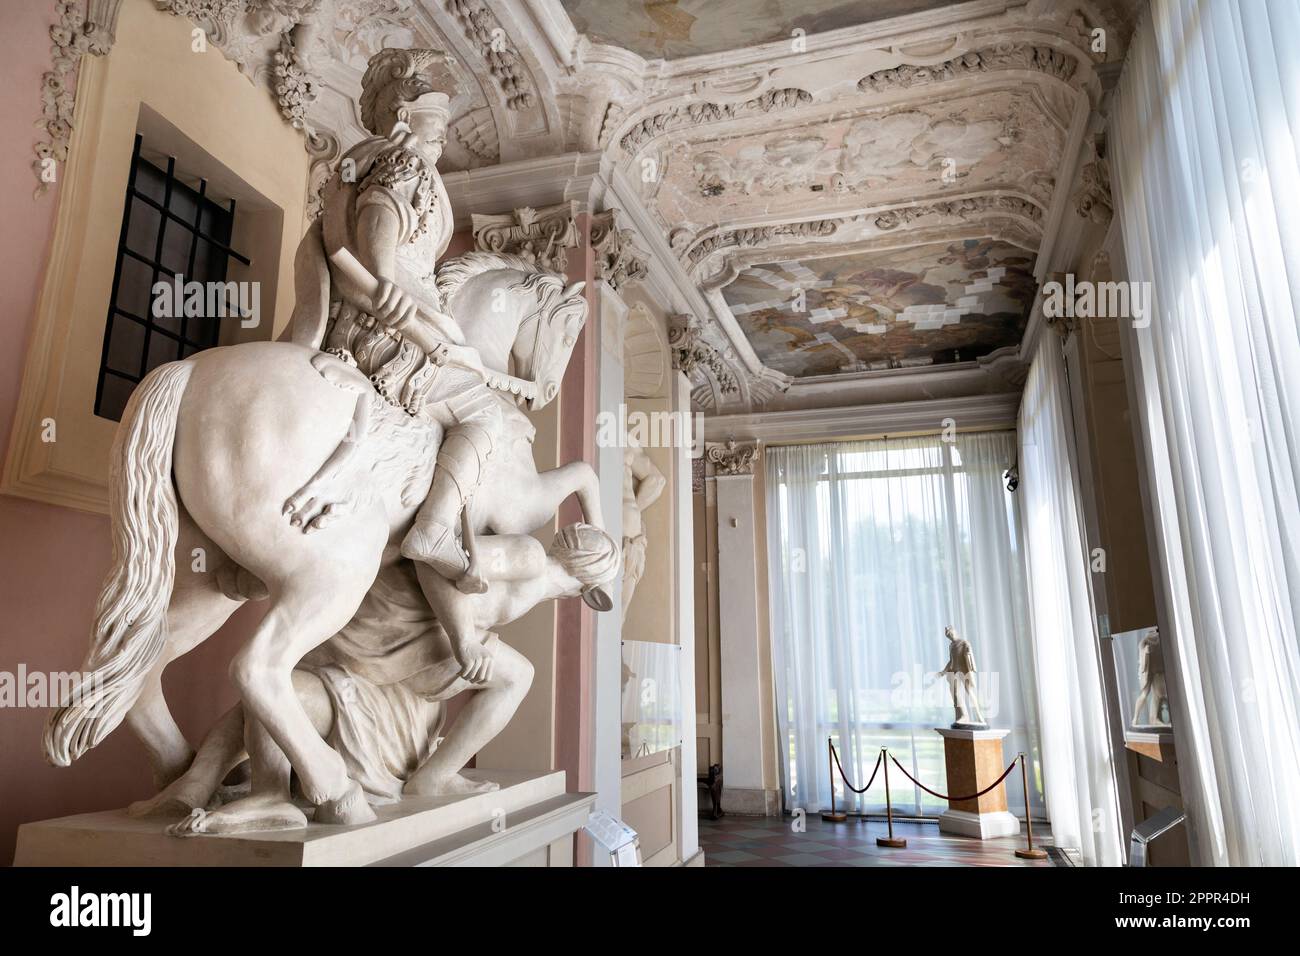 Equestrian statue of King Jan III and Michelangelo Palloni frescoes at the South Gallery, Wilanow Palace, Warsaw, Poland Stock Photo